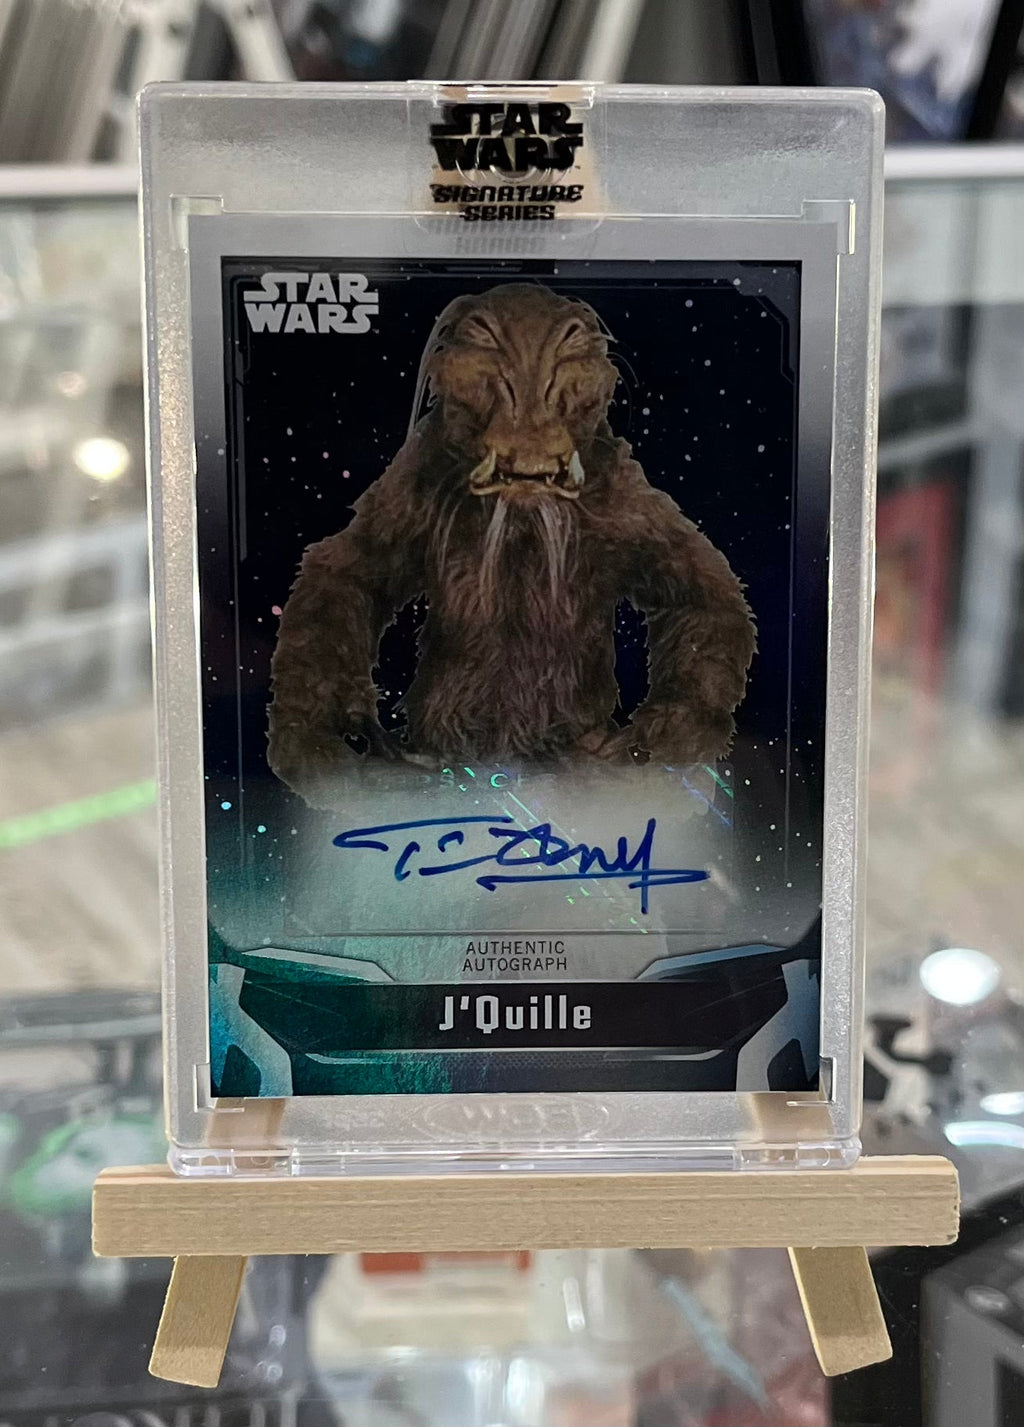 Star Wars Topps Authentic Autograph Card - Tim Dry as J’Quille